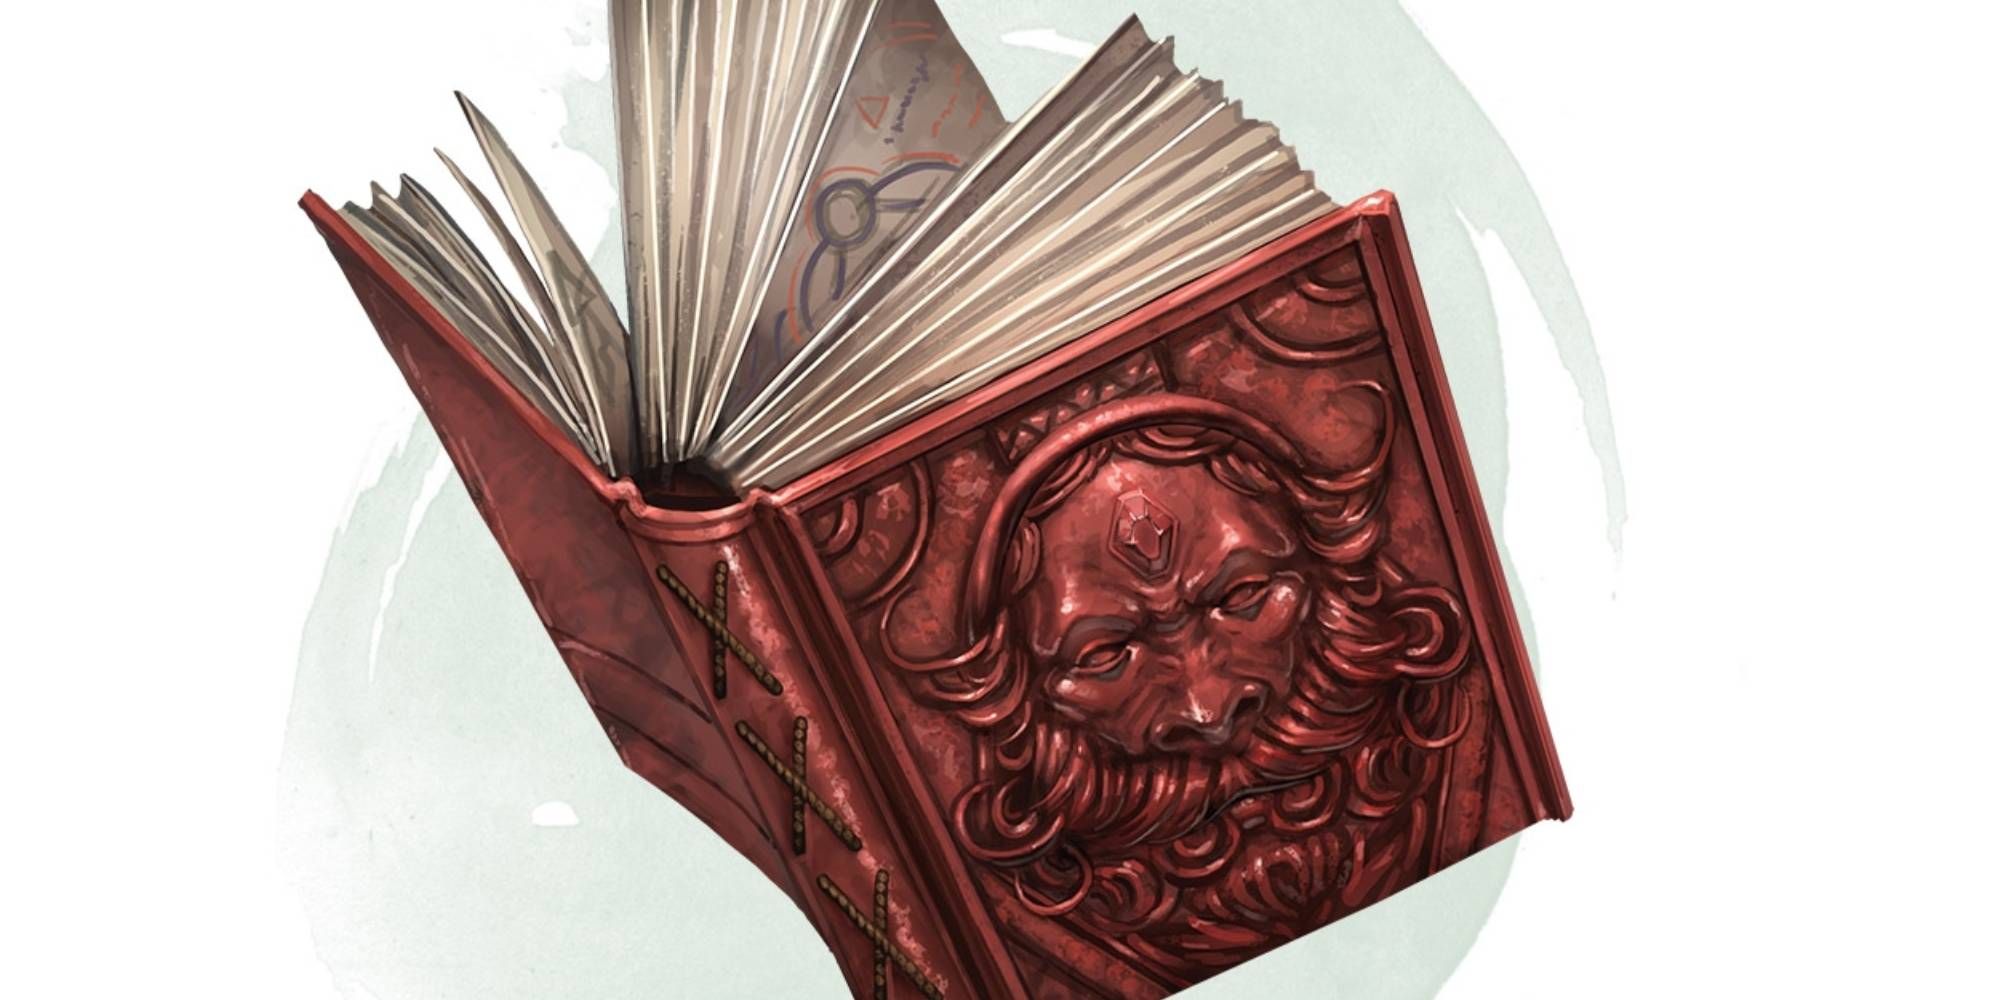 A red thick book with a bearded figure emblazoned on its cover